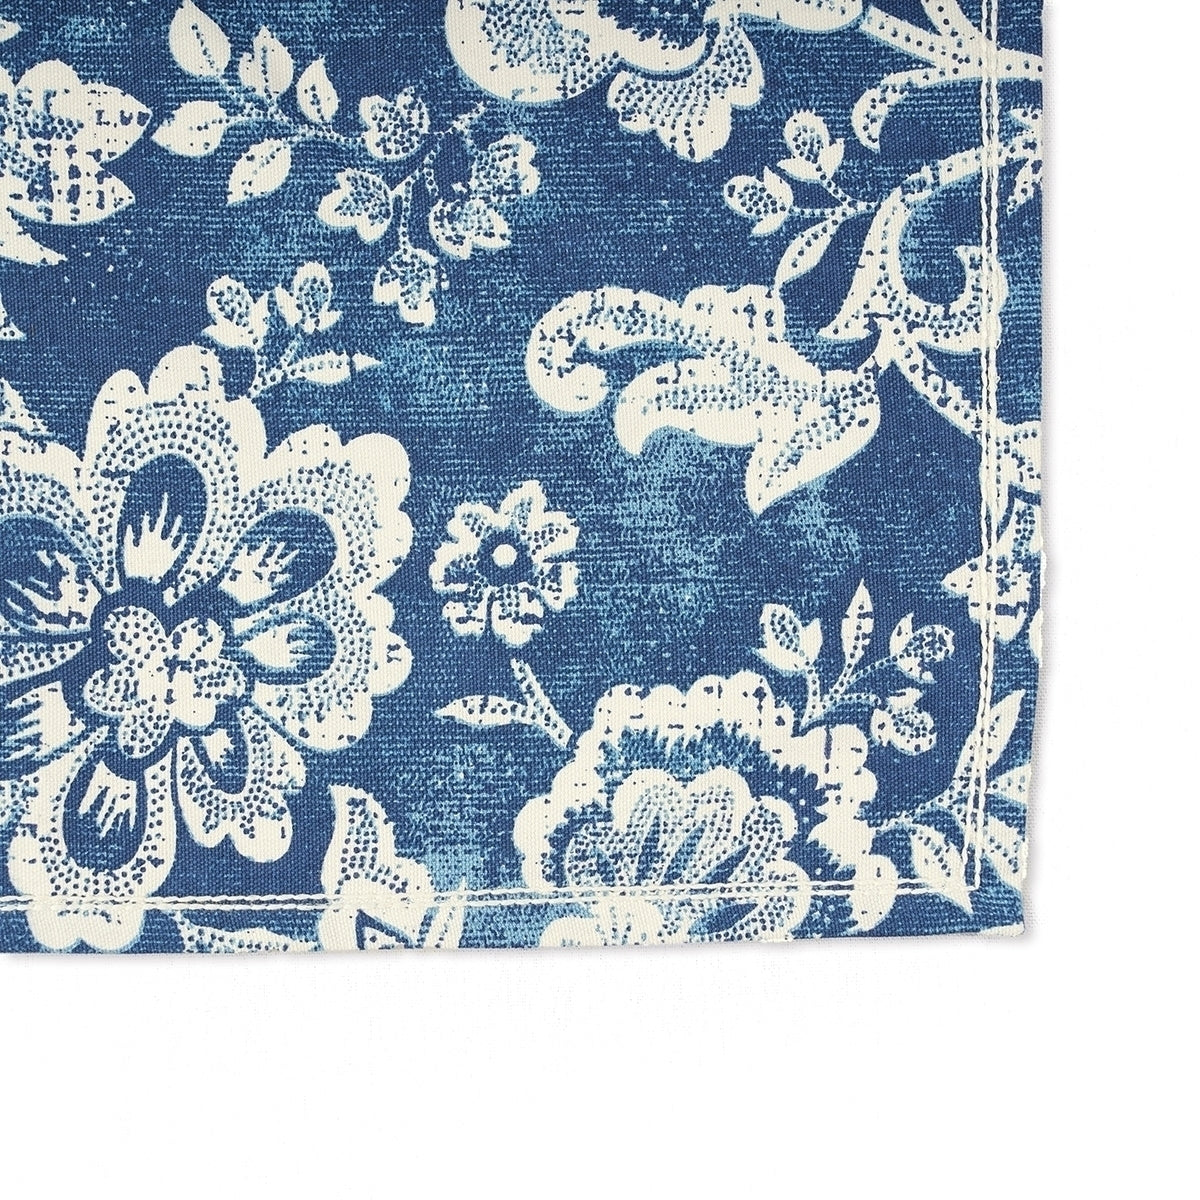 DOMINOTERIE Indigo Blue Printed Kitchen Towel, bold floral pattern, 100% cotton, size 20"X28"